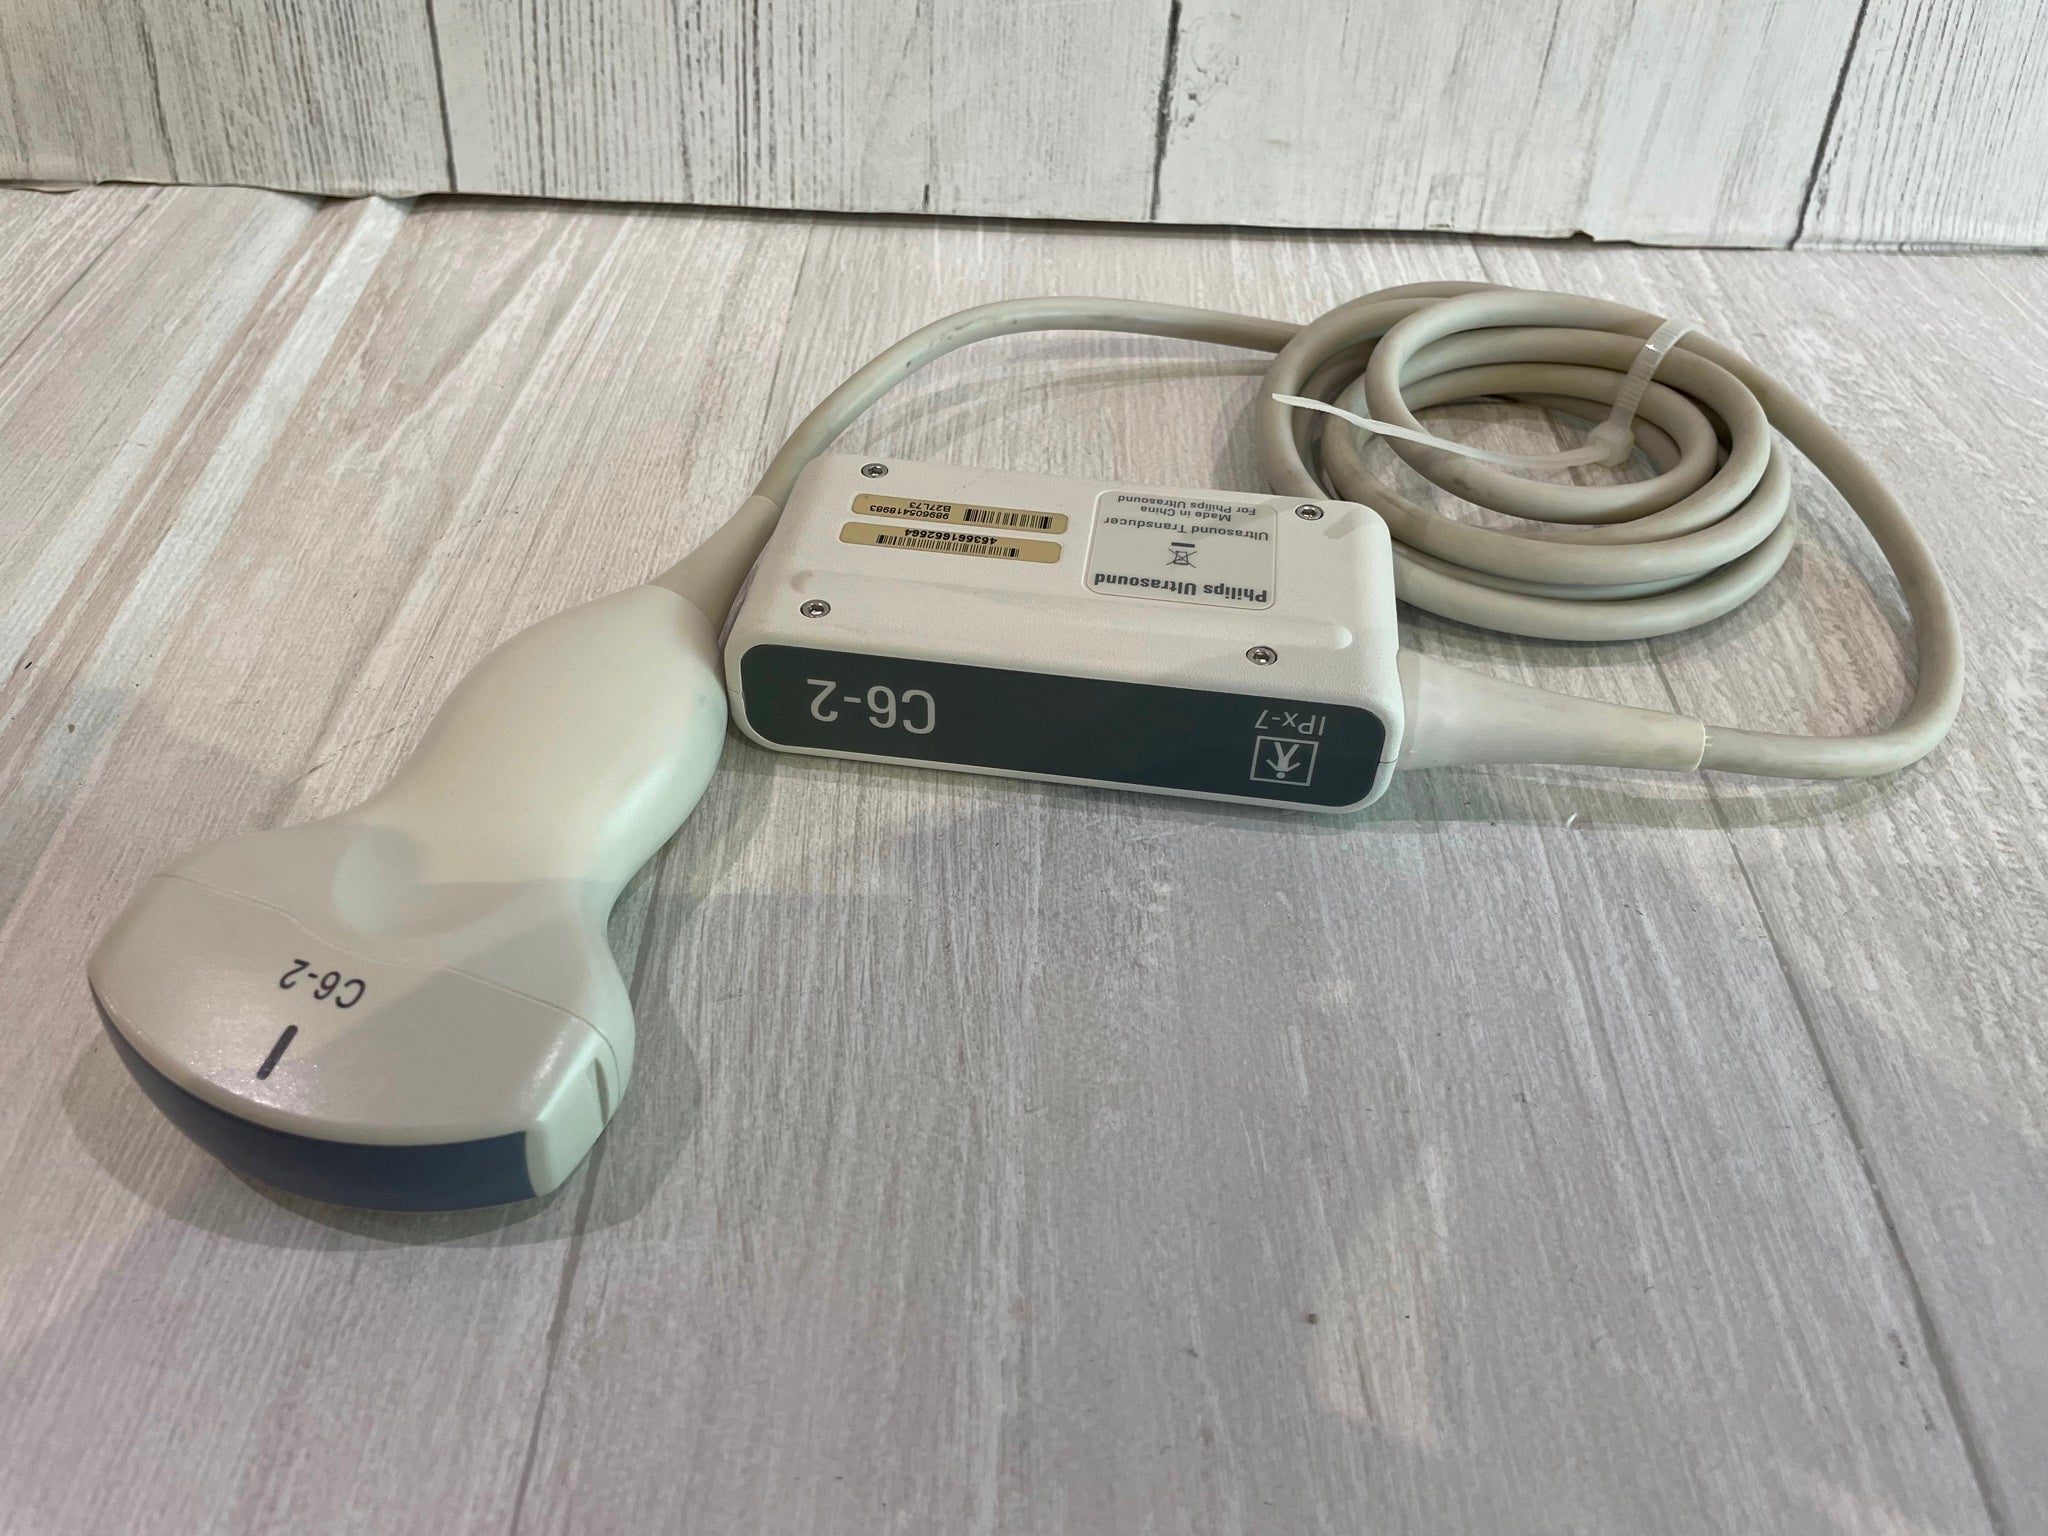 Philips C6-2 Compact Ultrasound Probe Transducer DIAGNOSTIC ULTRASOUND MACHINES FOR SALE